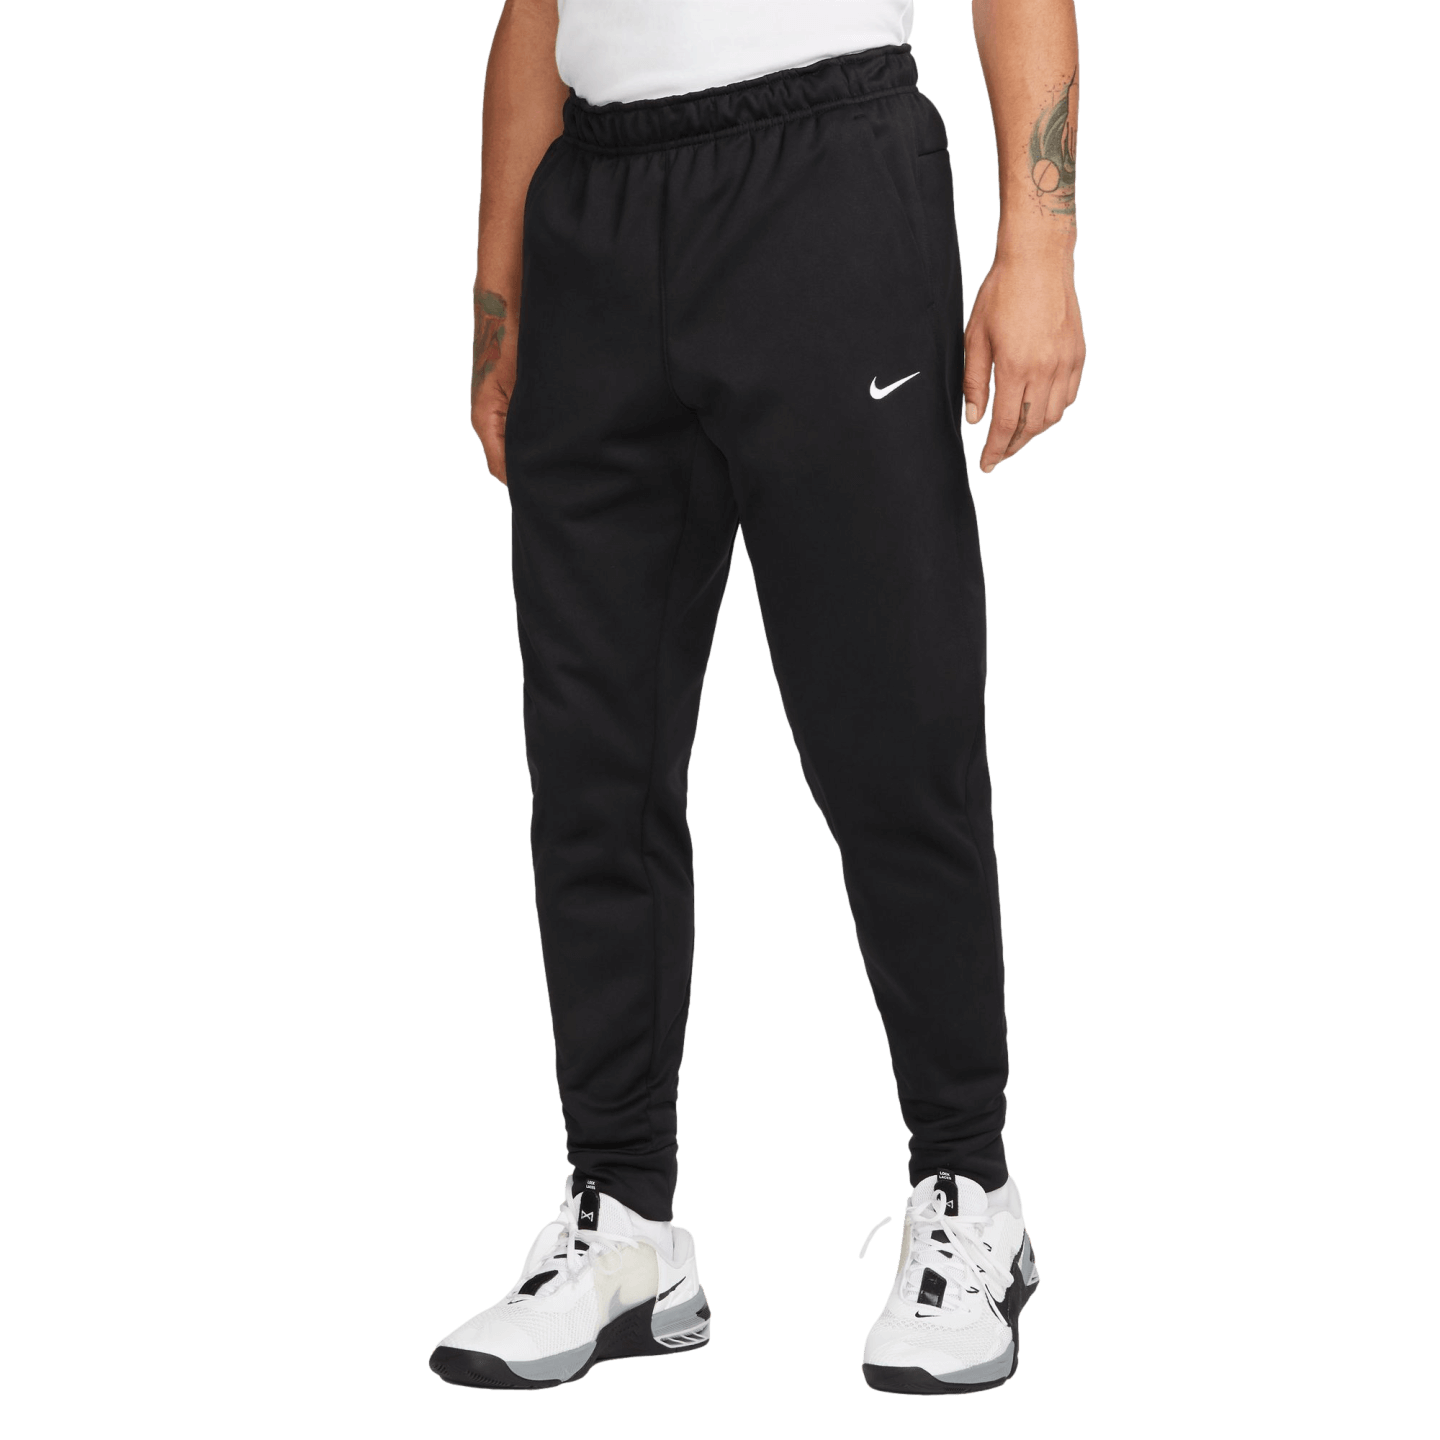 Nike Therma Tapered Fitness Pants